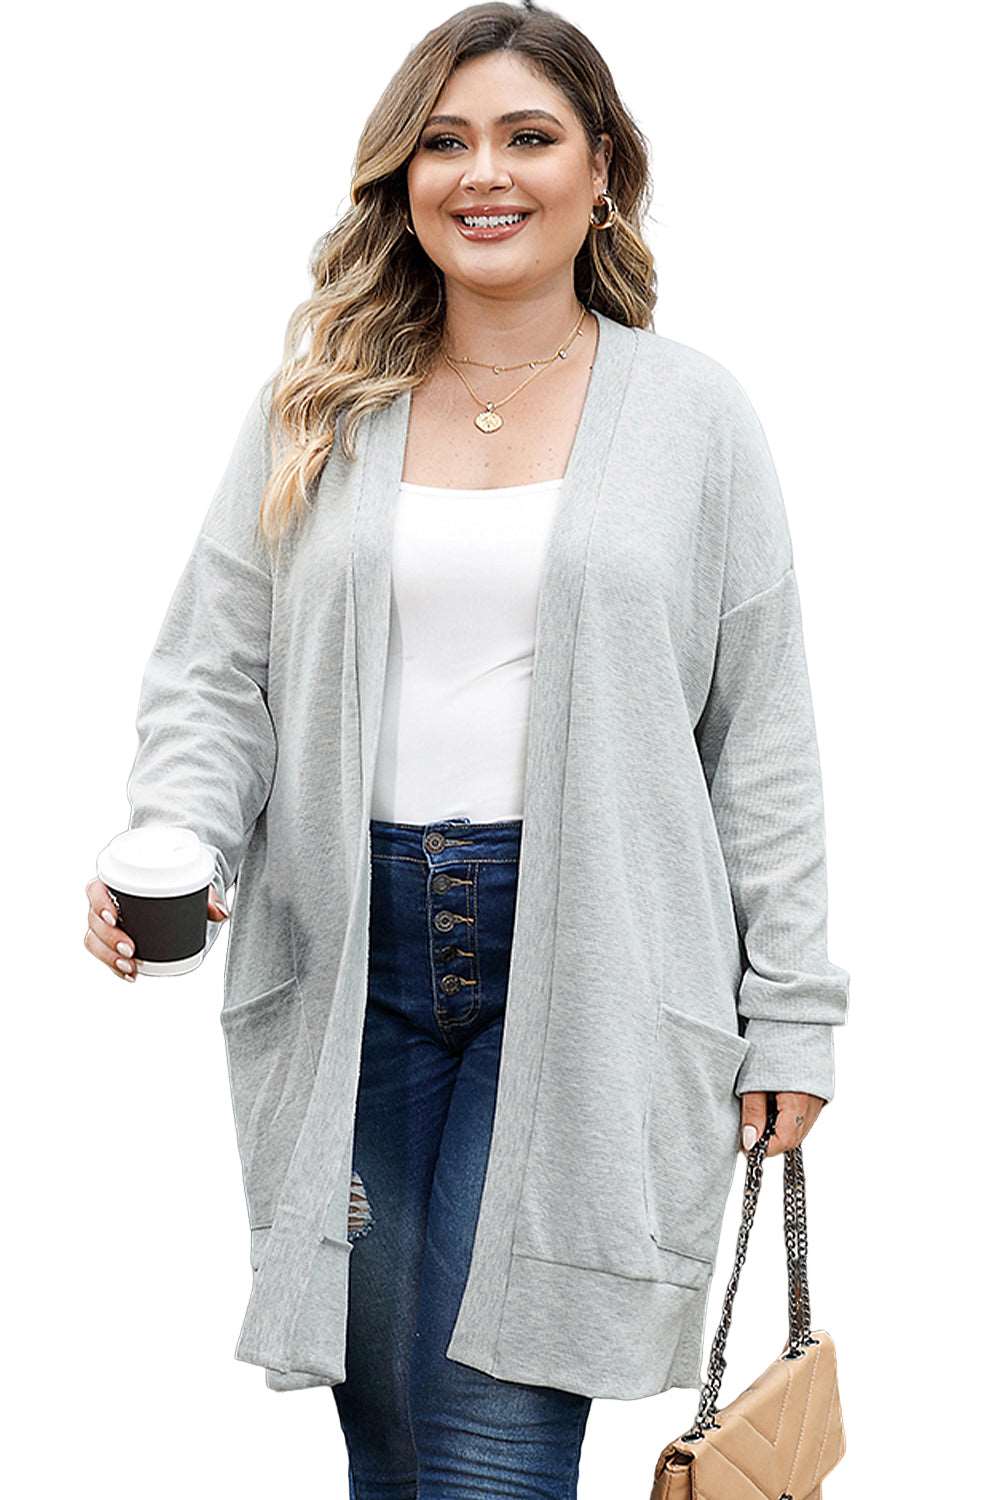 Beige Thermal Knit Pocketed Plus Size Cardigan - Bellisima Clothing Collective